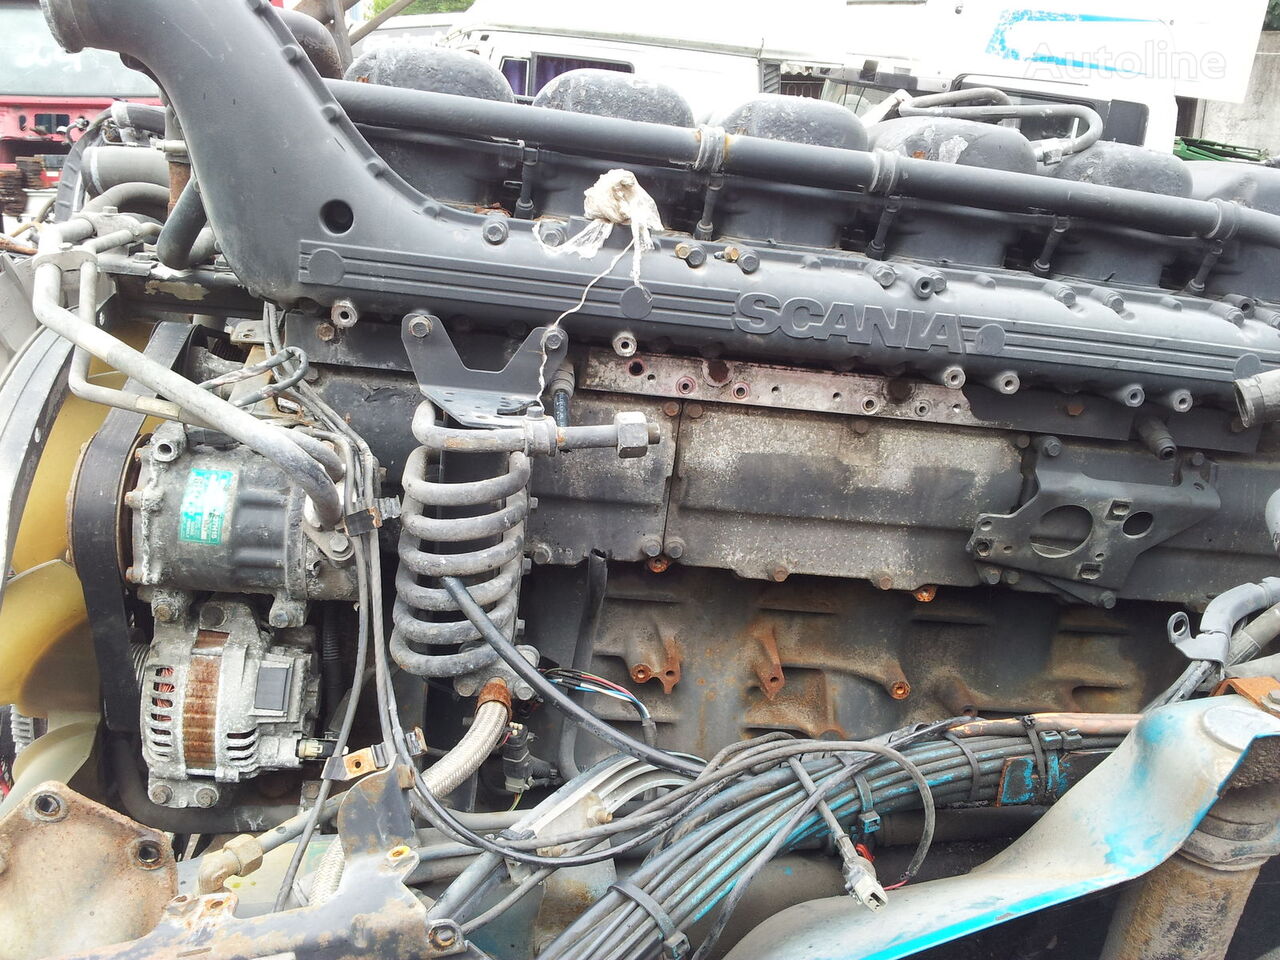 Scania 4 series engine 164C, 164G, 164L, P580, R580, DC1601, 580 PS, v8 for Scania 164C, 164G, 164L, P580, R580, DC1601 truck tractor